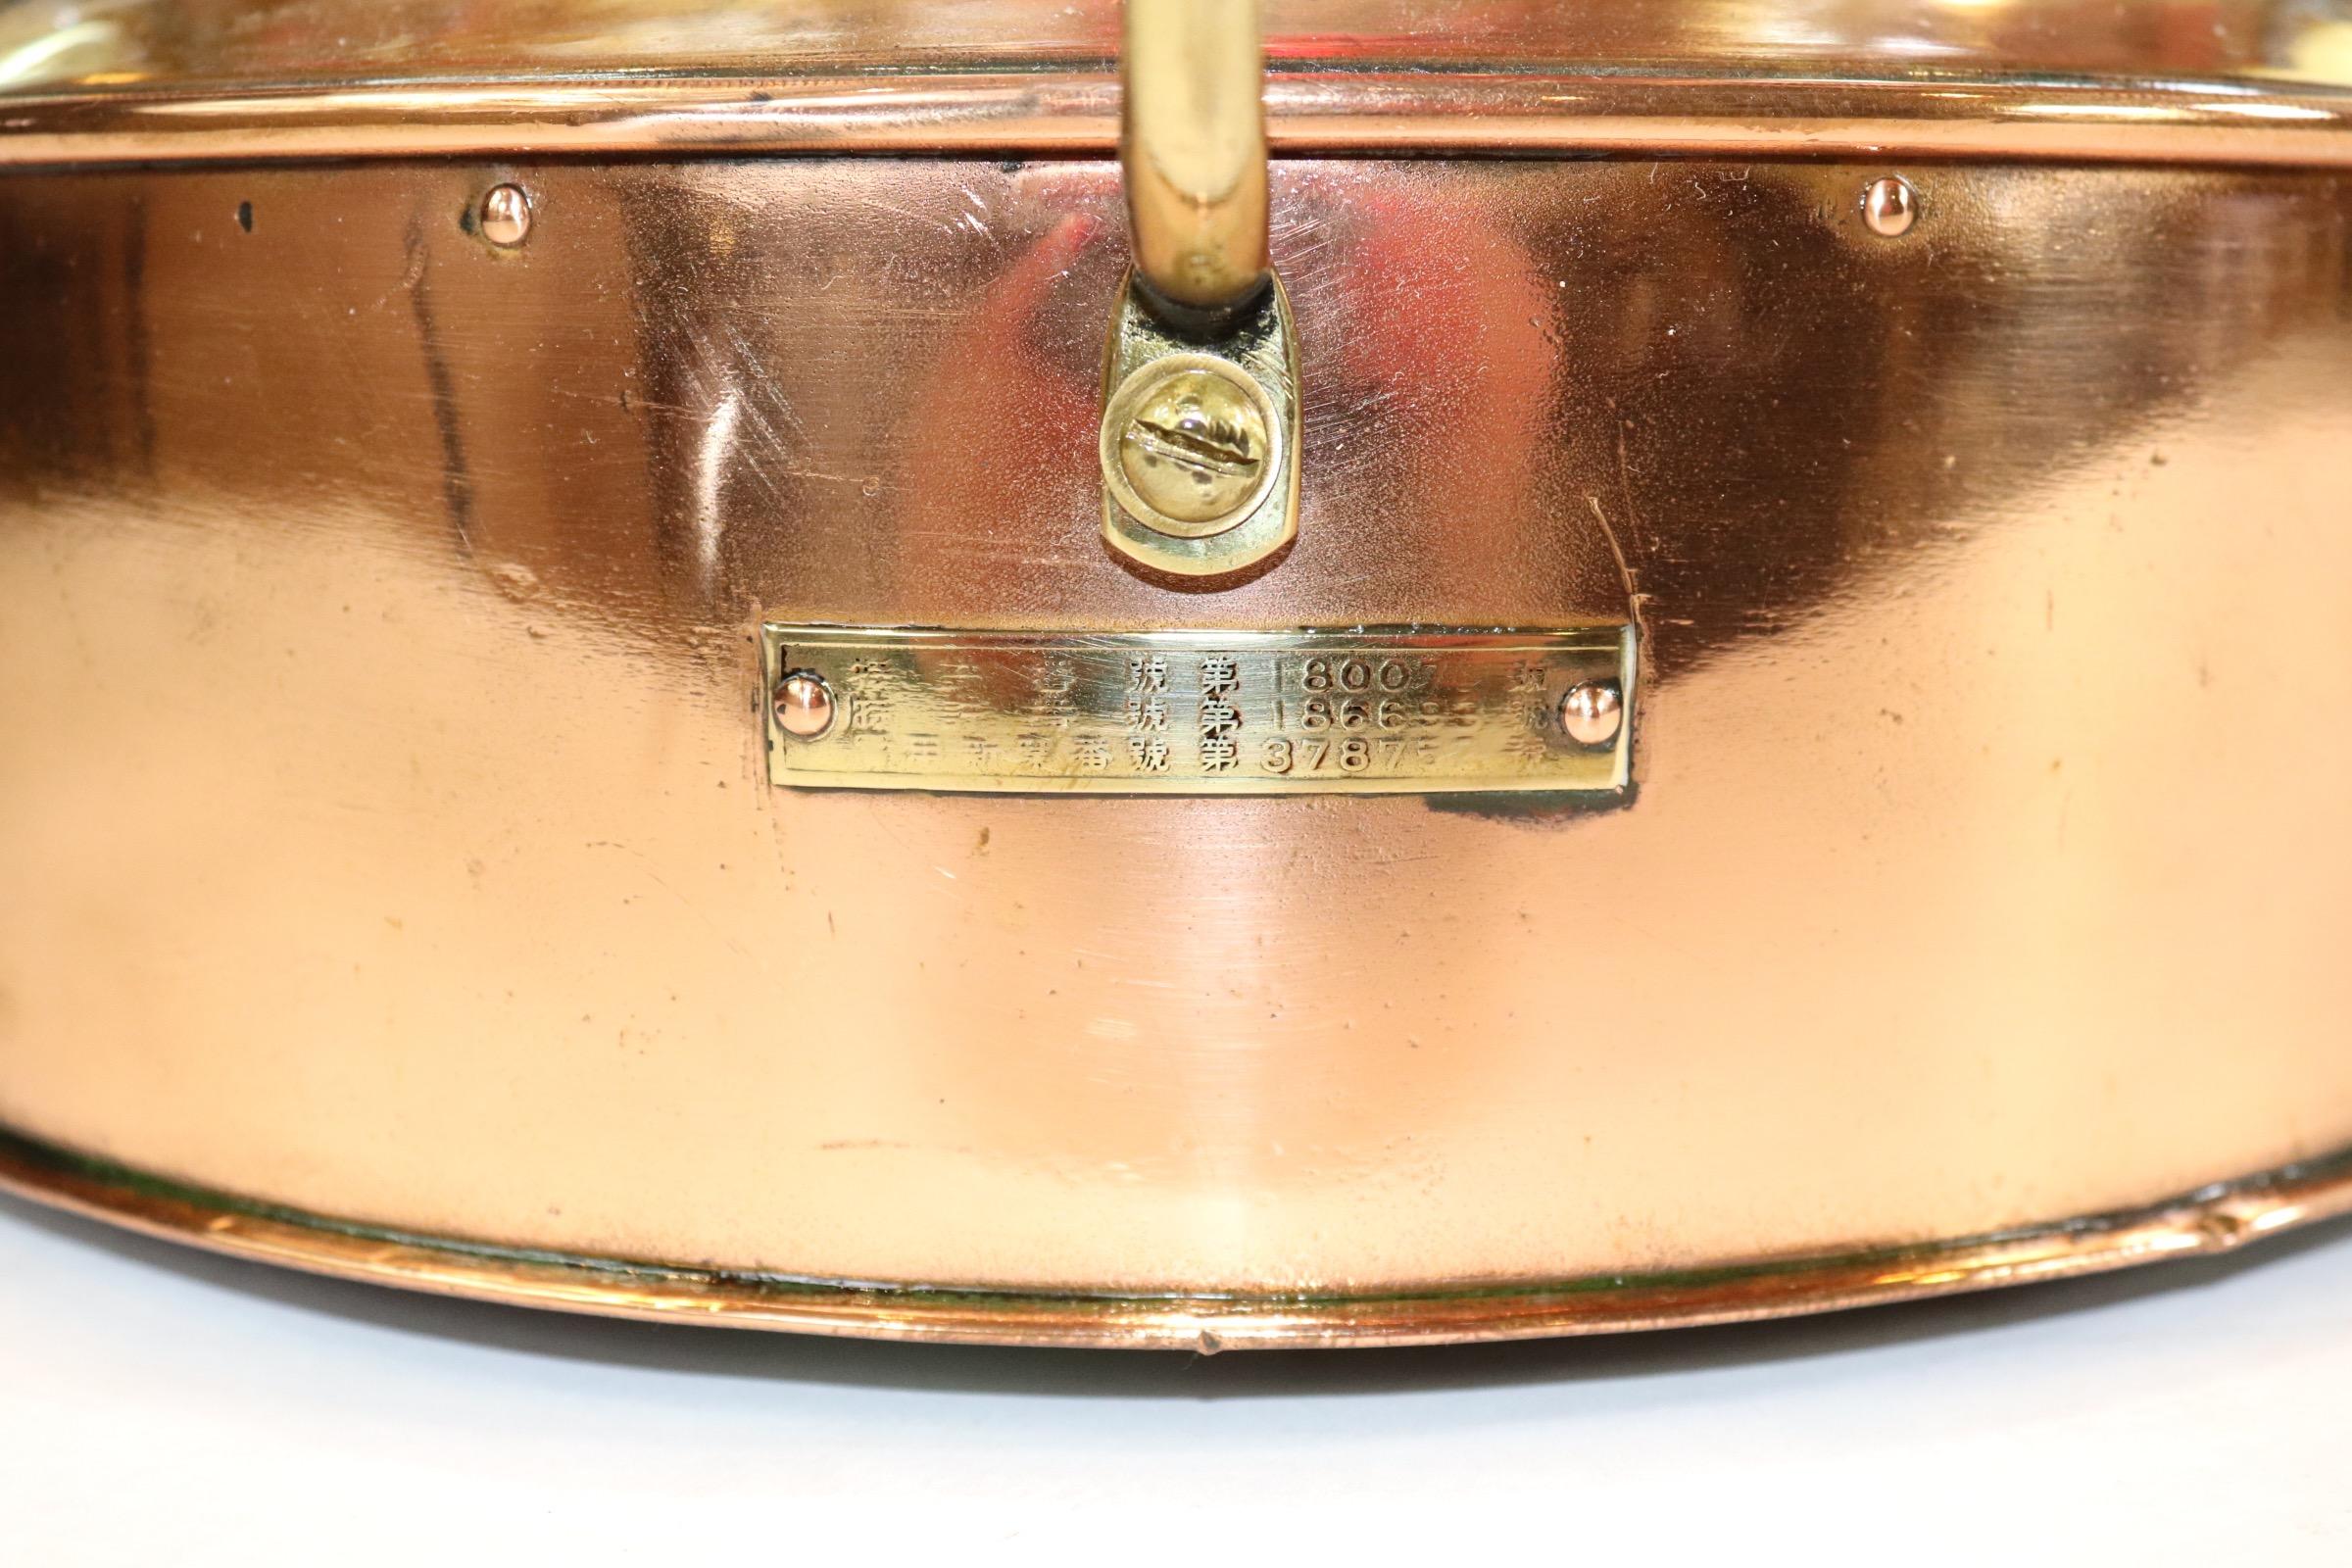 Polished and lacquered ships port lantern with Fresnel glass lens, removable red filter, protective brass bar, hinged rear door and a new wire and socket for home display. With brass makers badge from Japanese maker Nippon Sento and dated 1955.